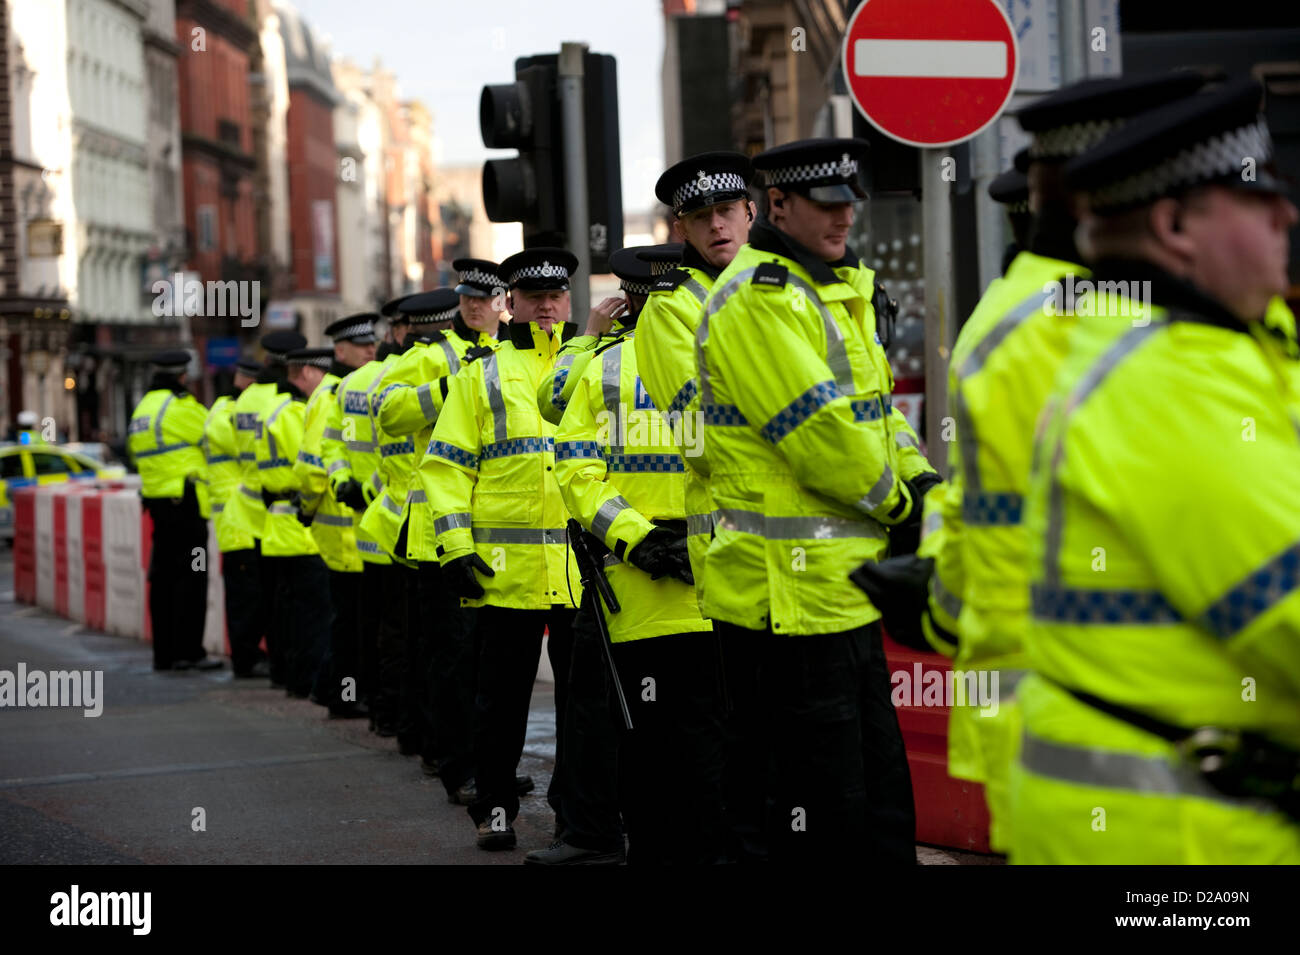 Row of Police Officers at Public Order Event UK Stock Photo